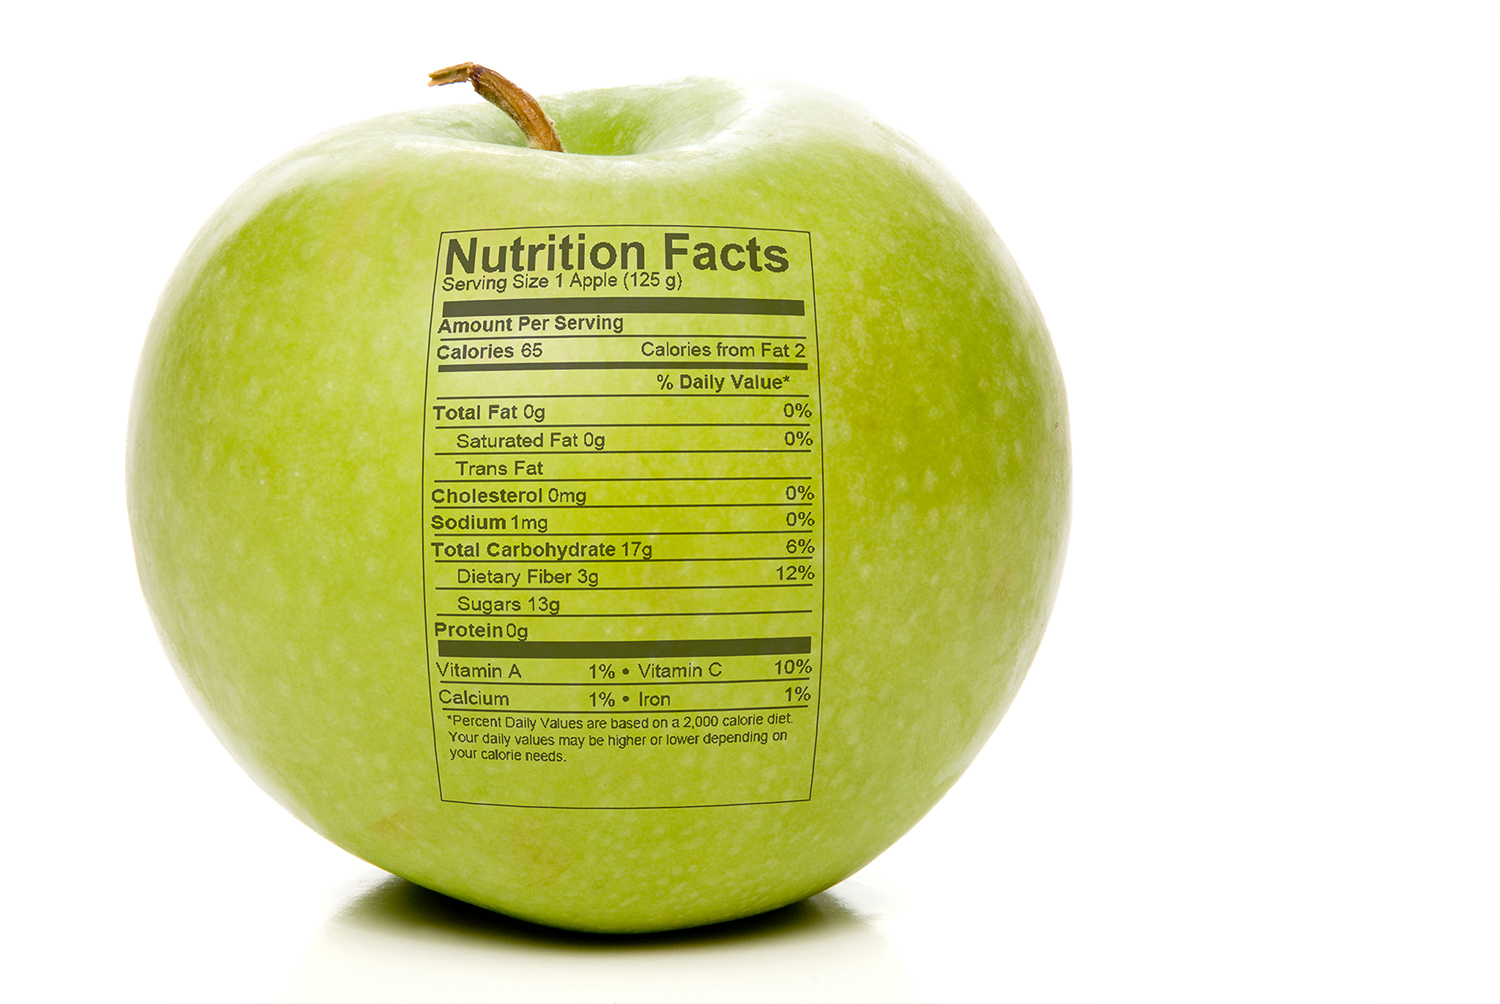 Granny Smith Apples Information and Facts